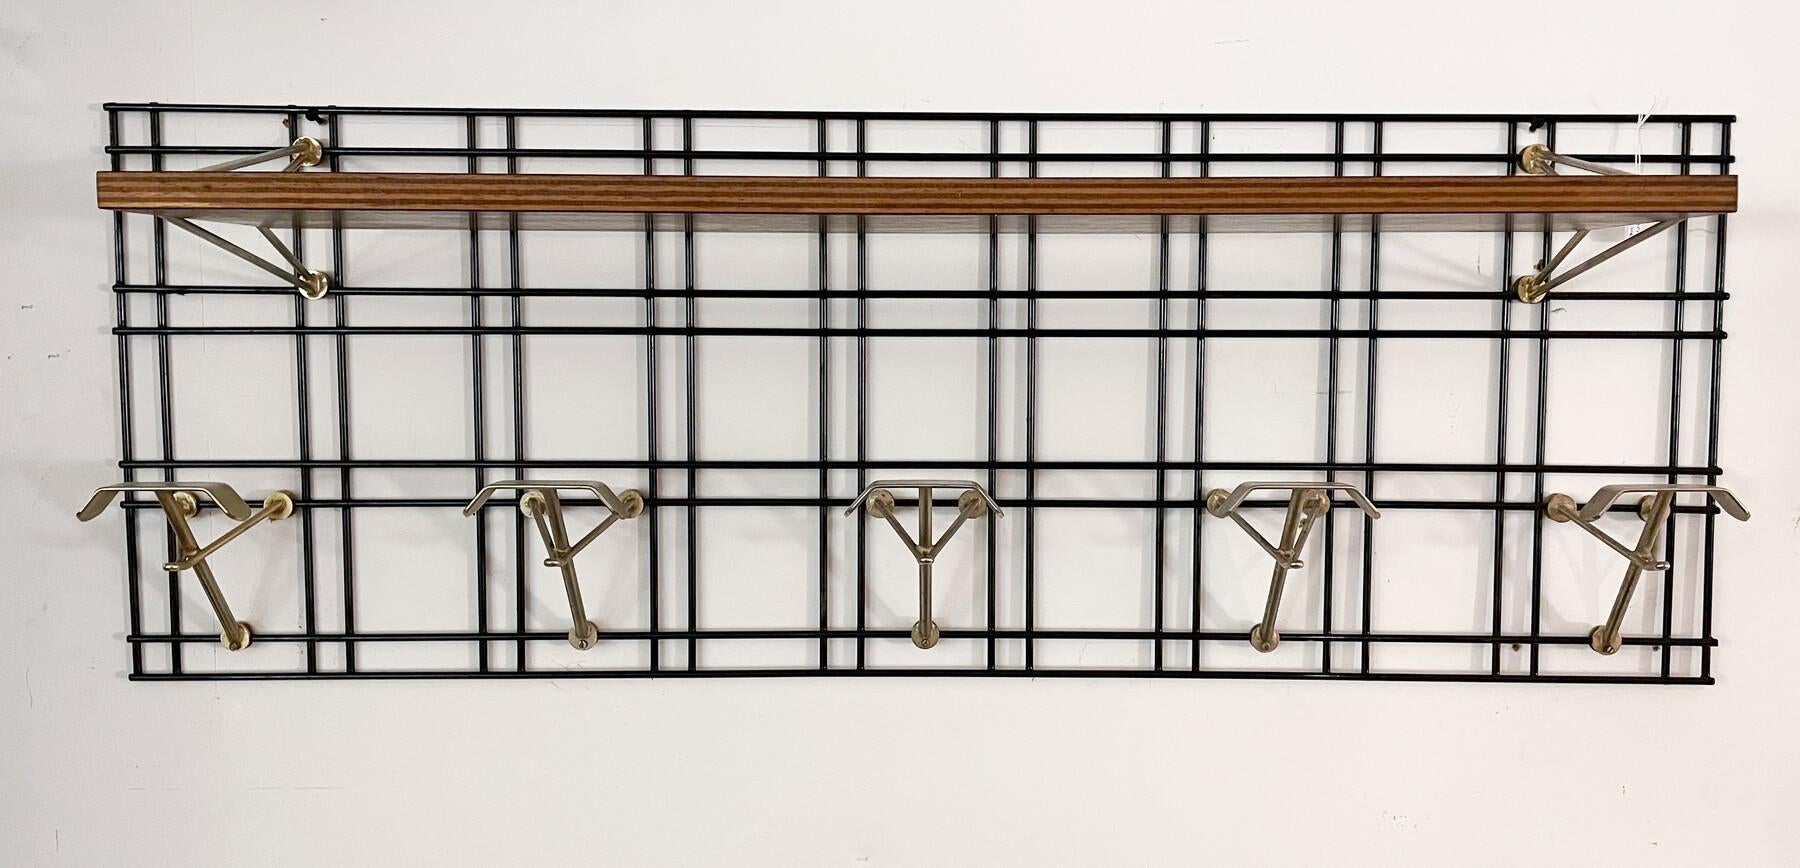 Wood Mid-Century Modern Coat Rack by Studio BBPR for Olivetti - Italy 1960s For Sale